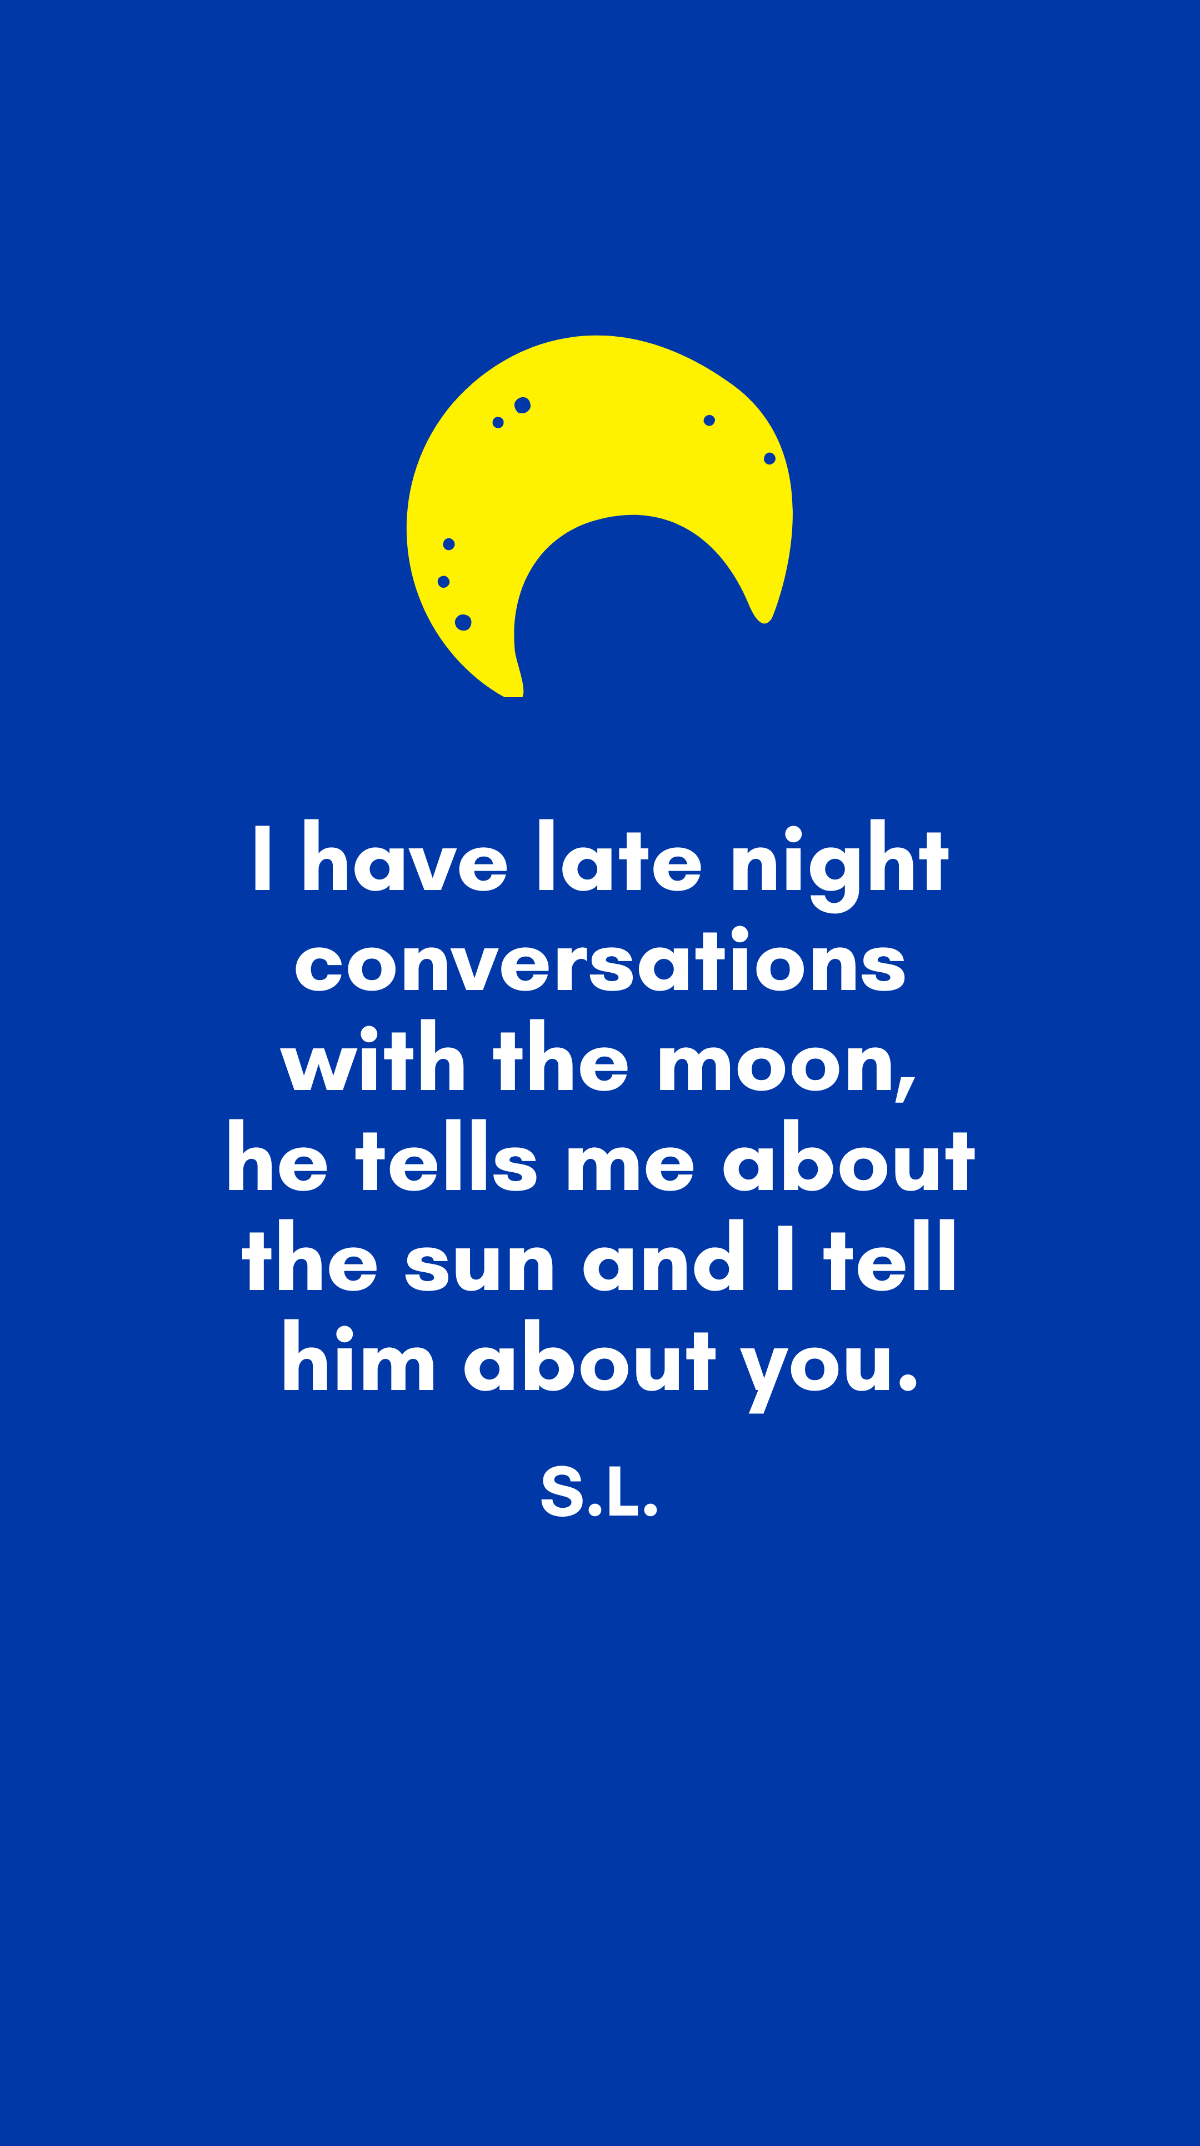 S.L. - I have late night conversations with the moon, he tells me about the sun and I tell him about you. Template